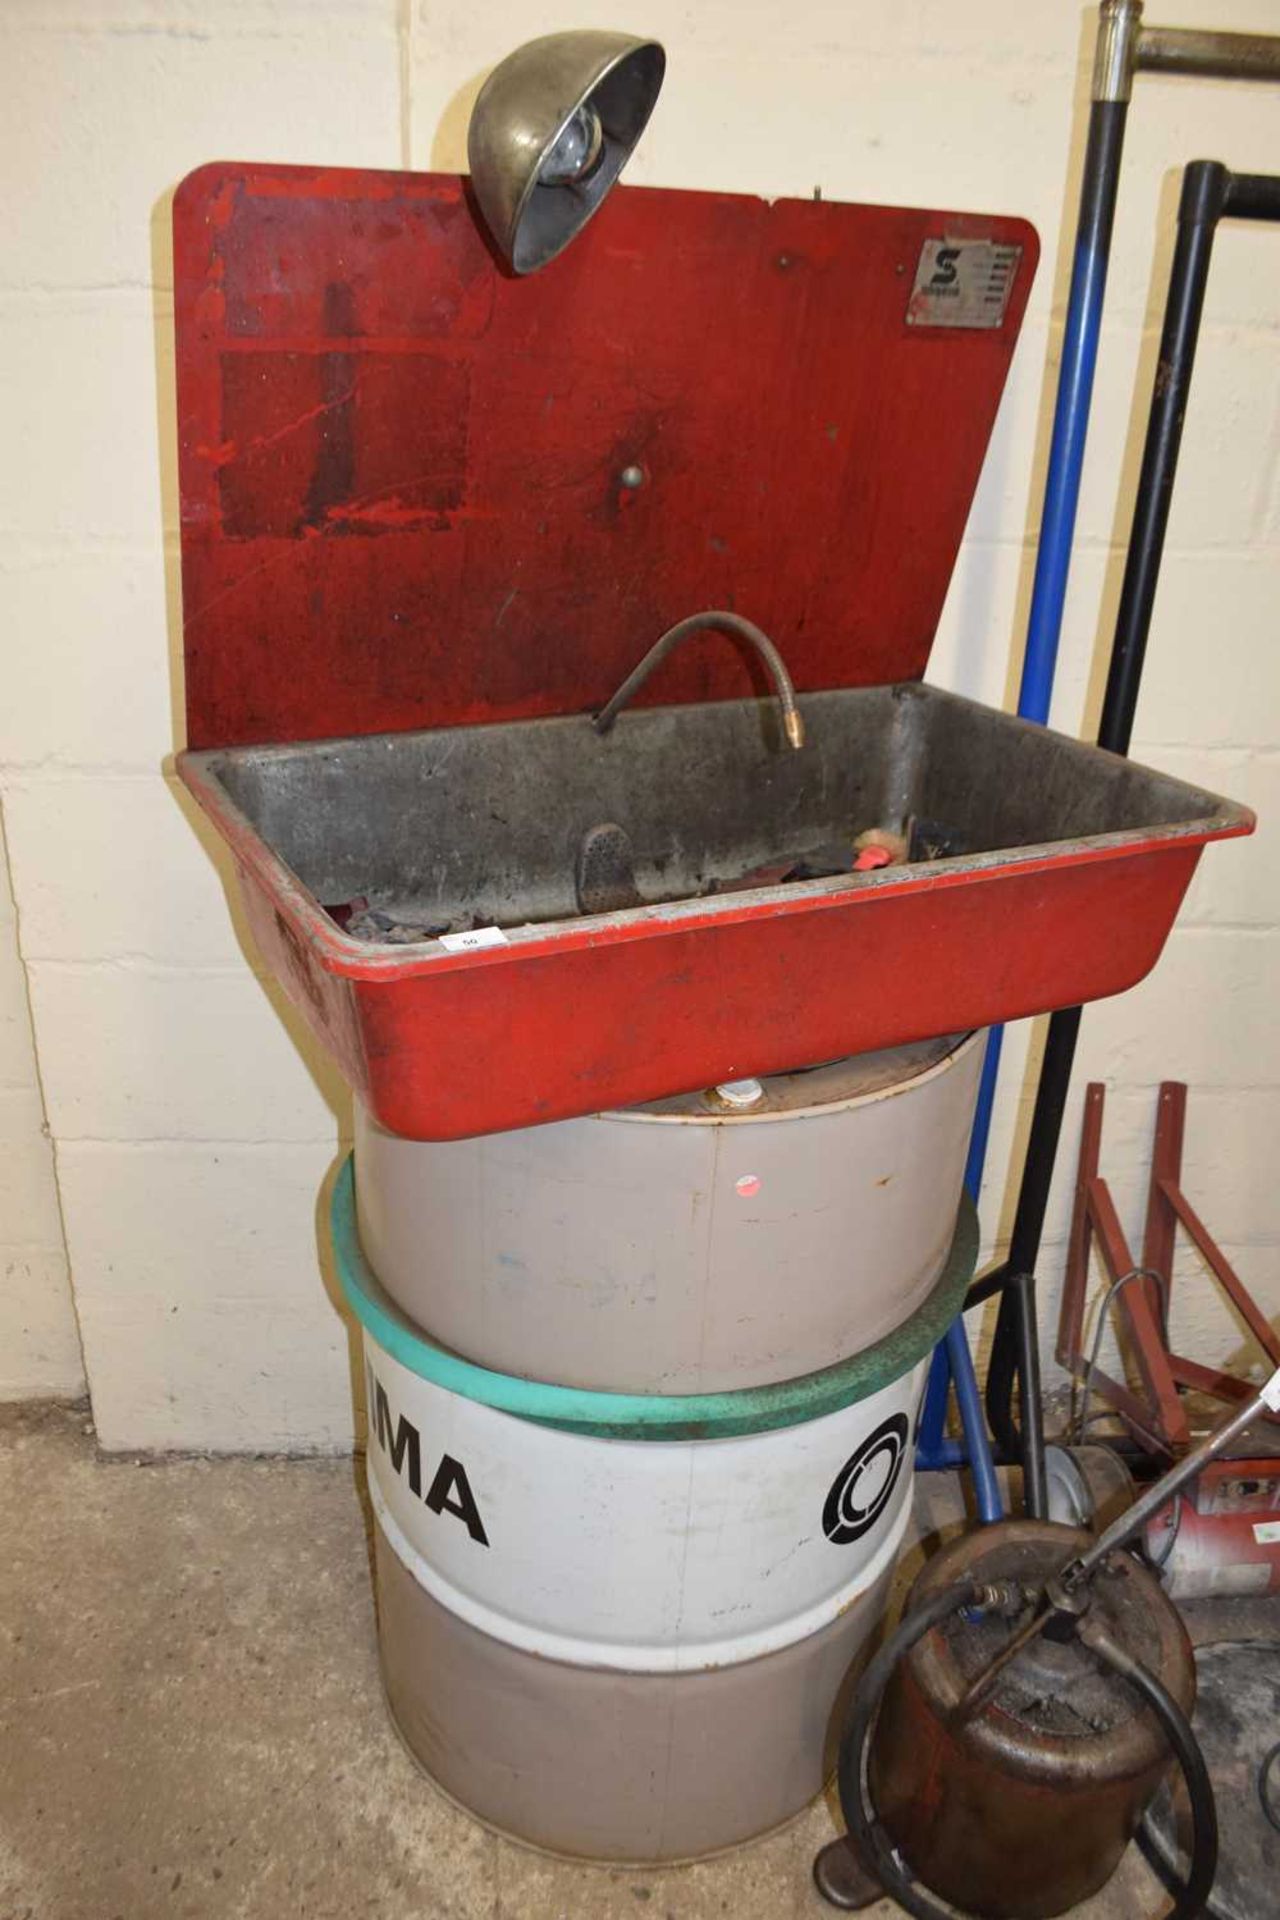 A safety Kleen oil bath with drum